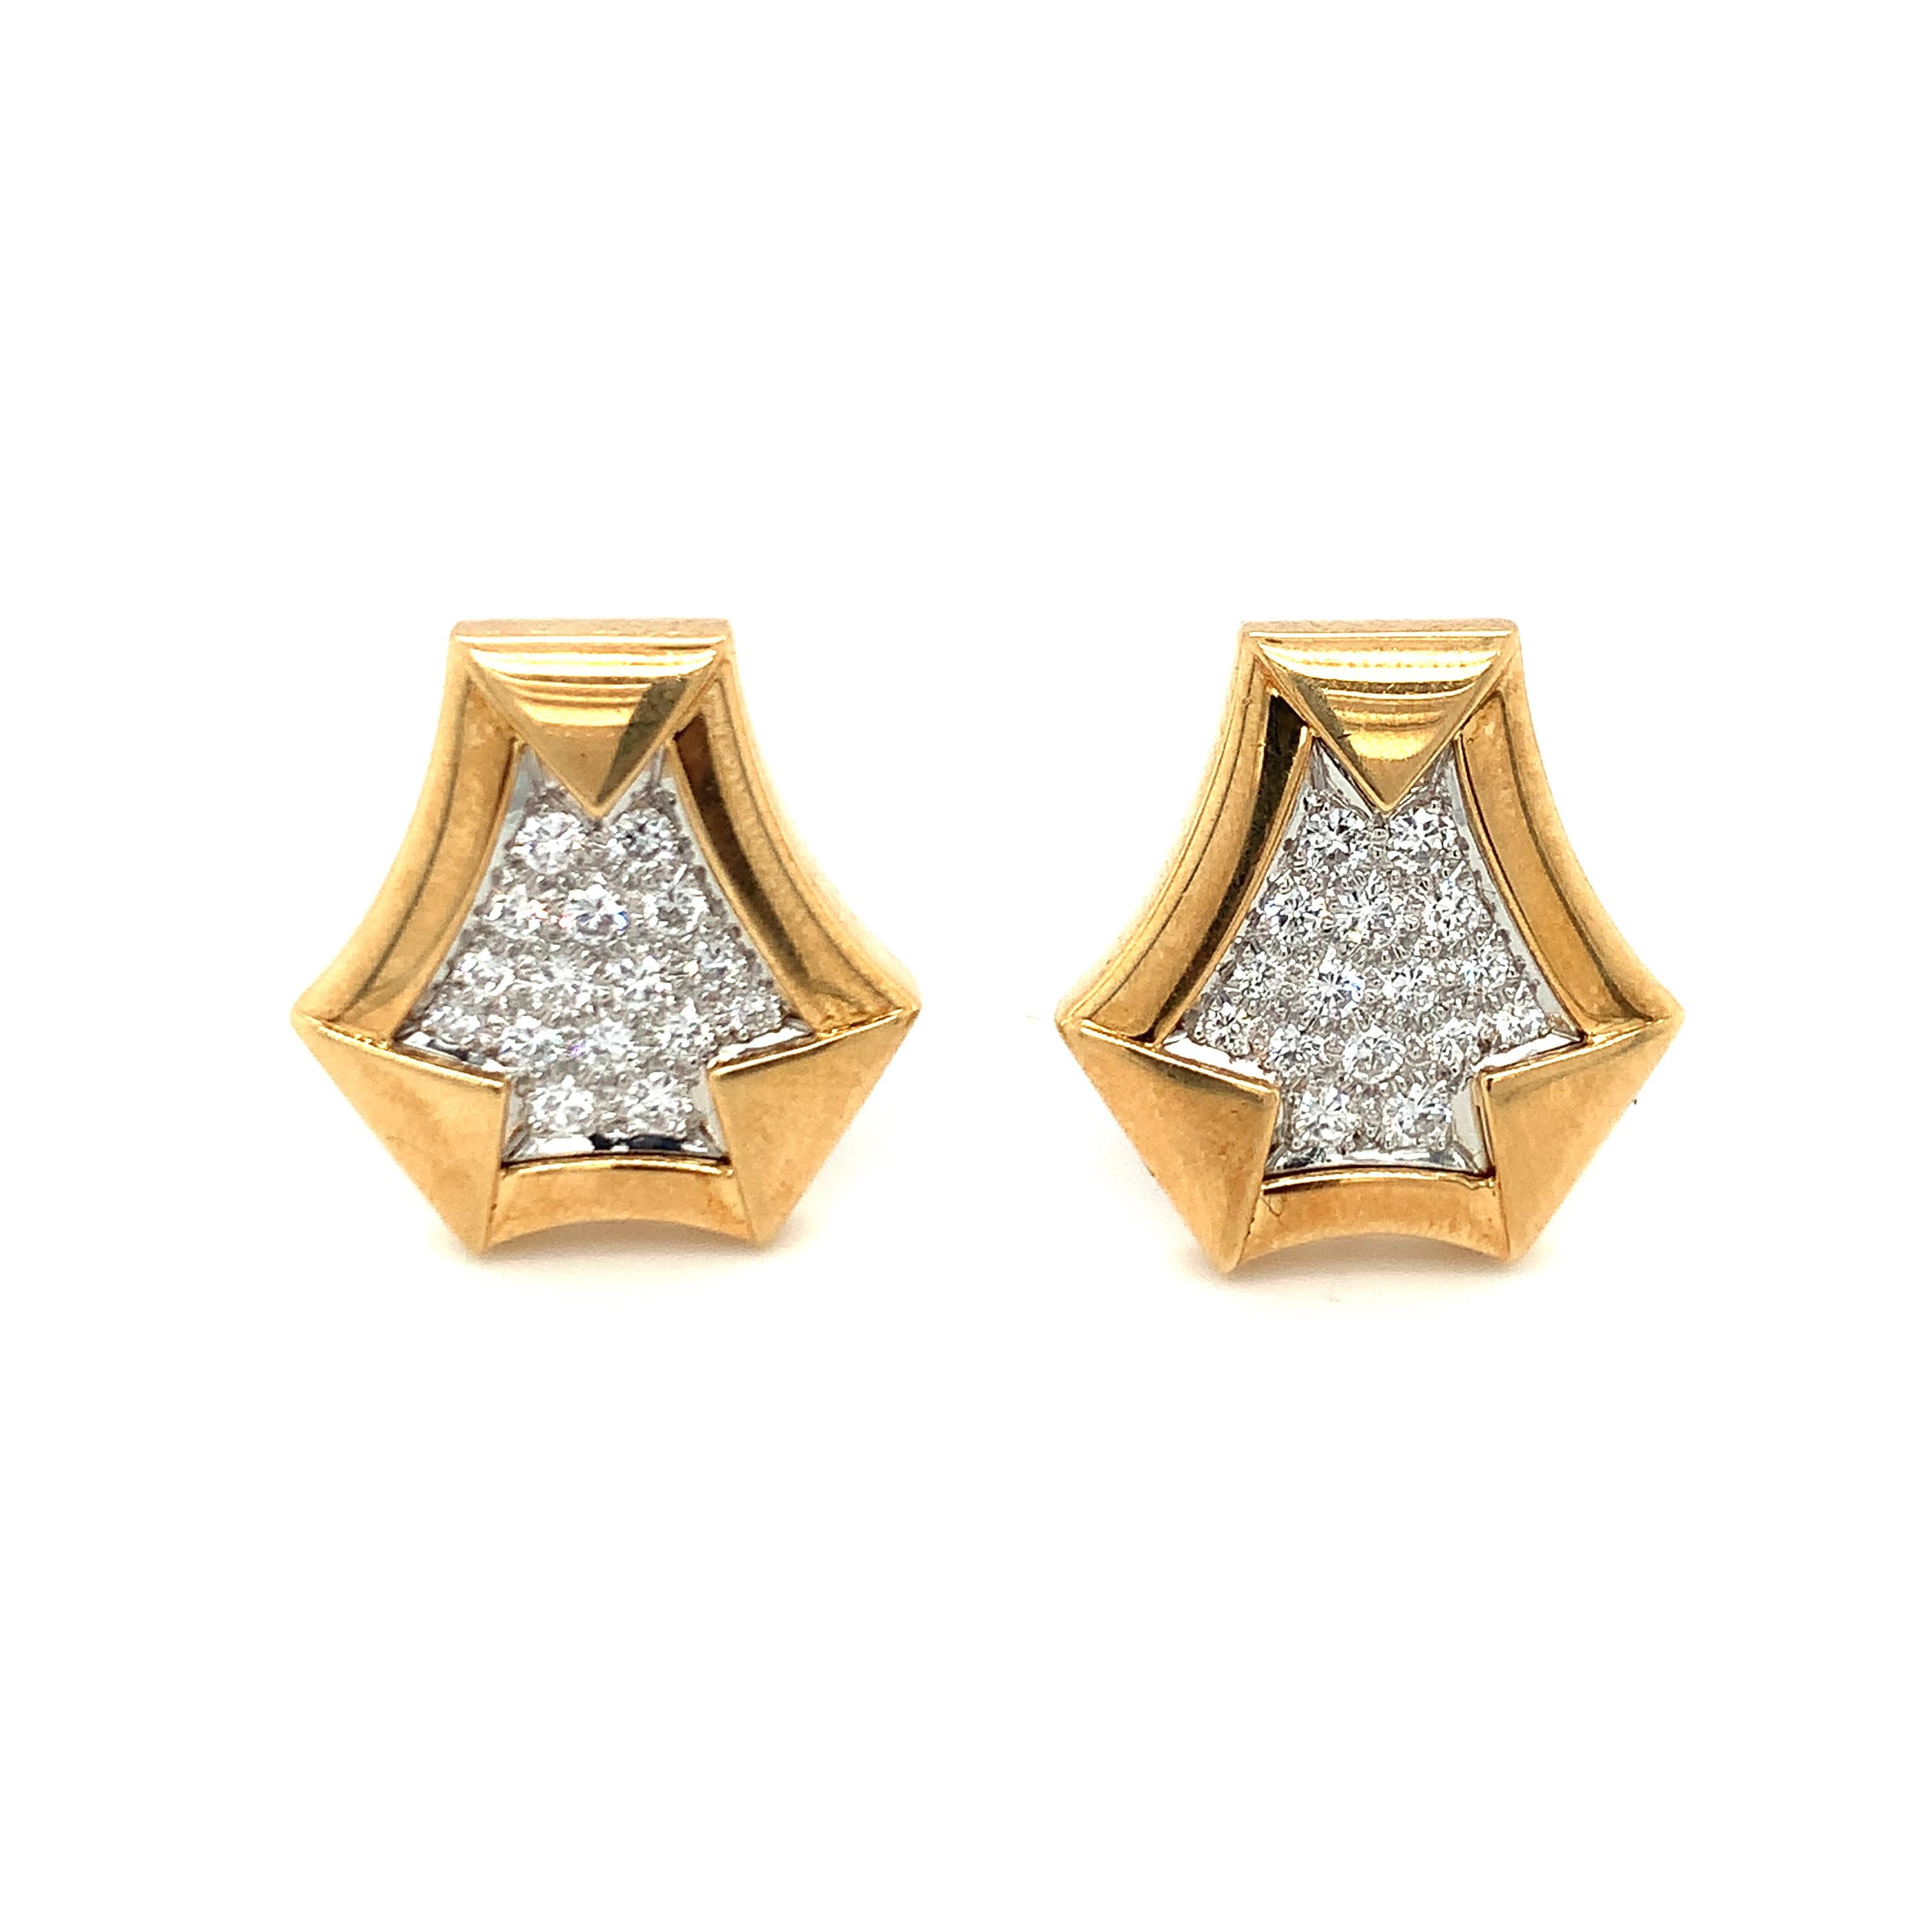 One pair of diamond pave platinum and 18K yellow gold earrings with geometric design featuring 32 pave-set, round brilliant cut diamonds weighing 1.25 ct. with F-G color and VS-1 clarity. The earrings hold posts with 14K yellow gold omega